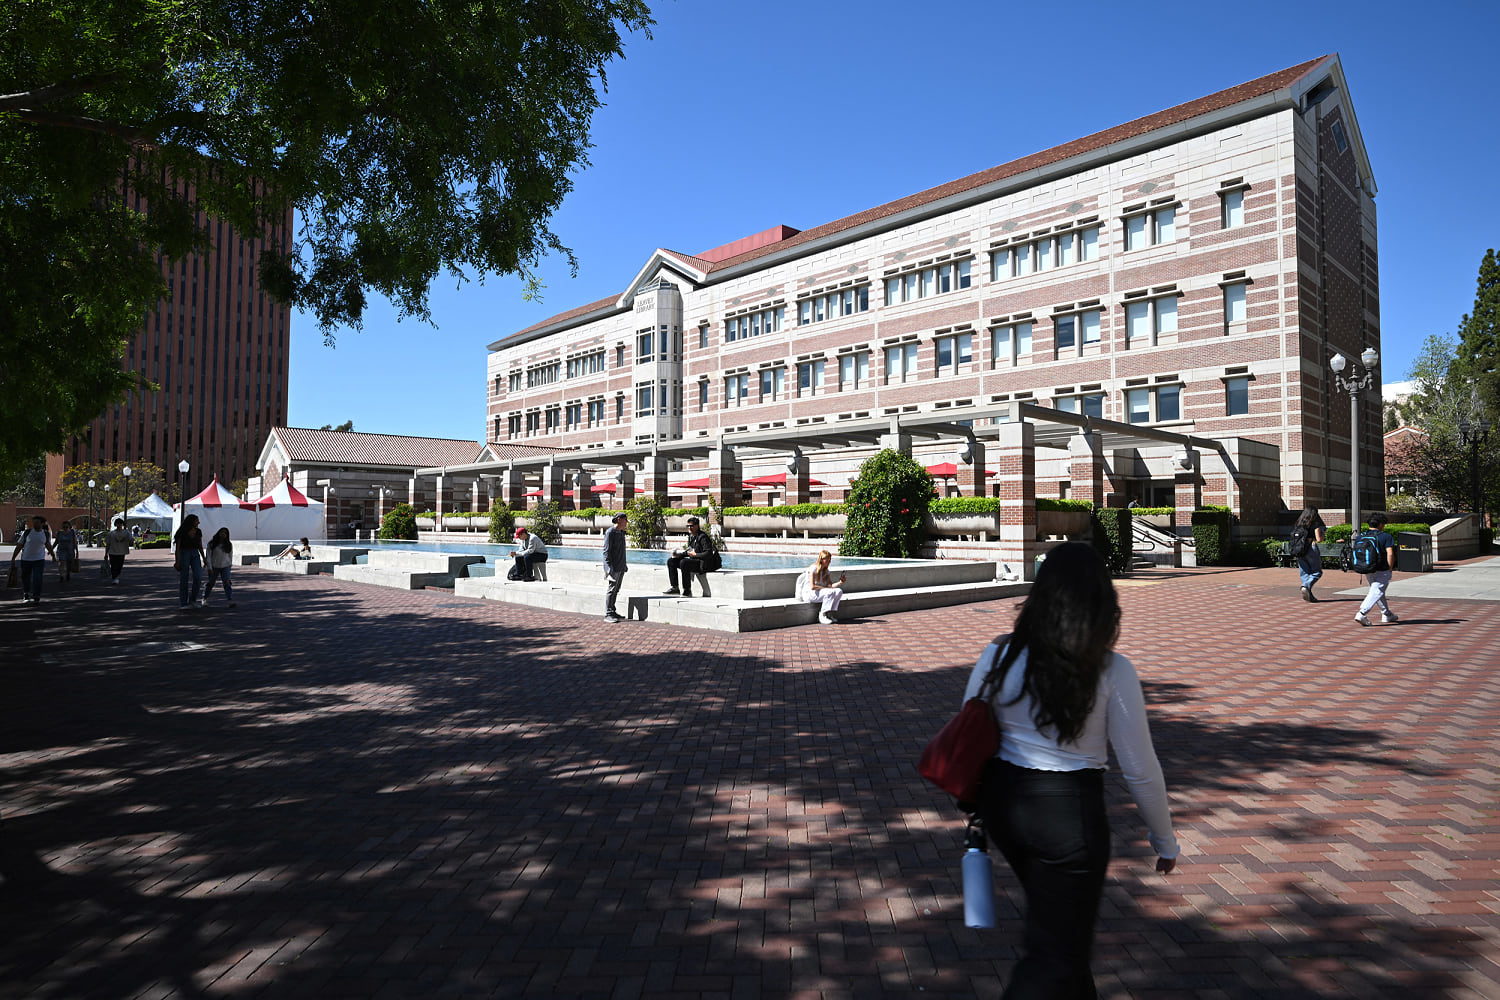 USC decision to cancel Muslim valedictorian's speech further inflames tensions on campus